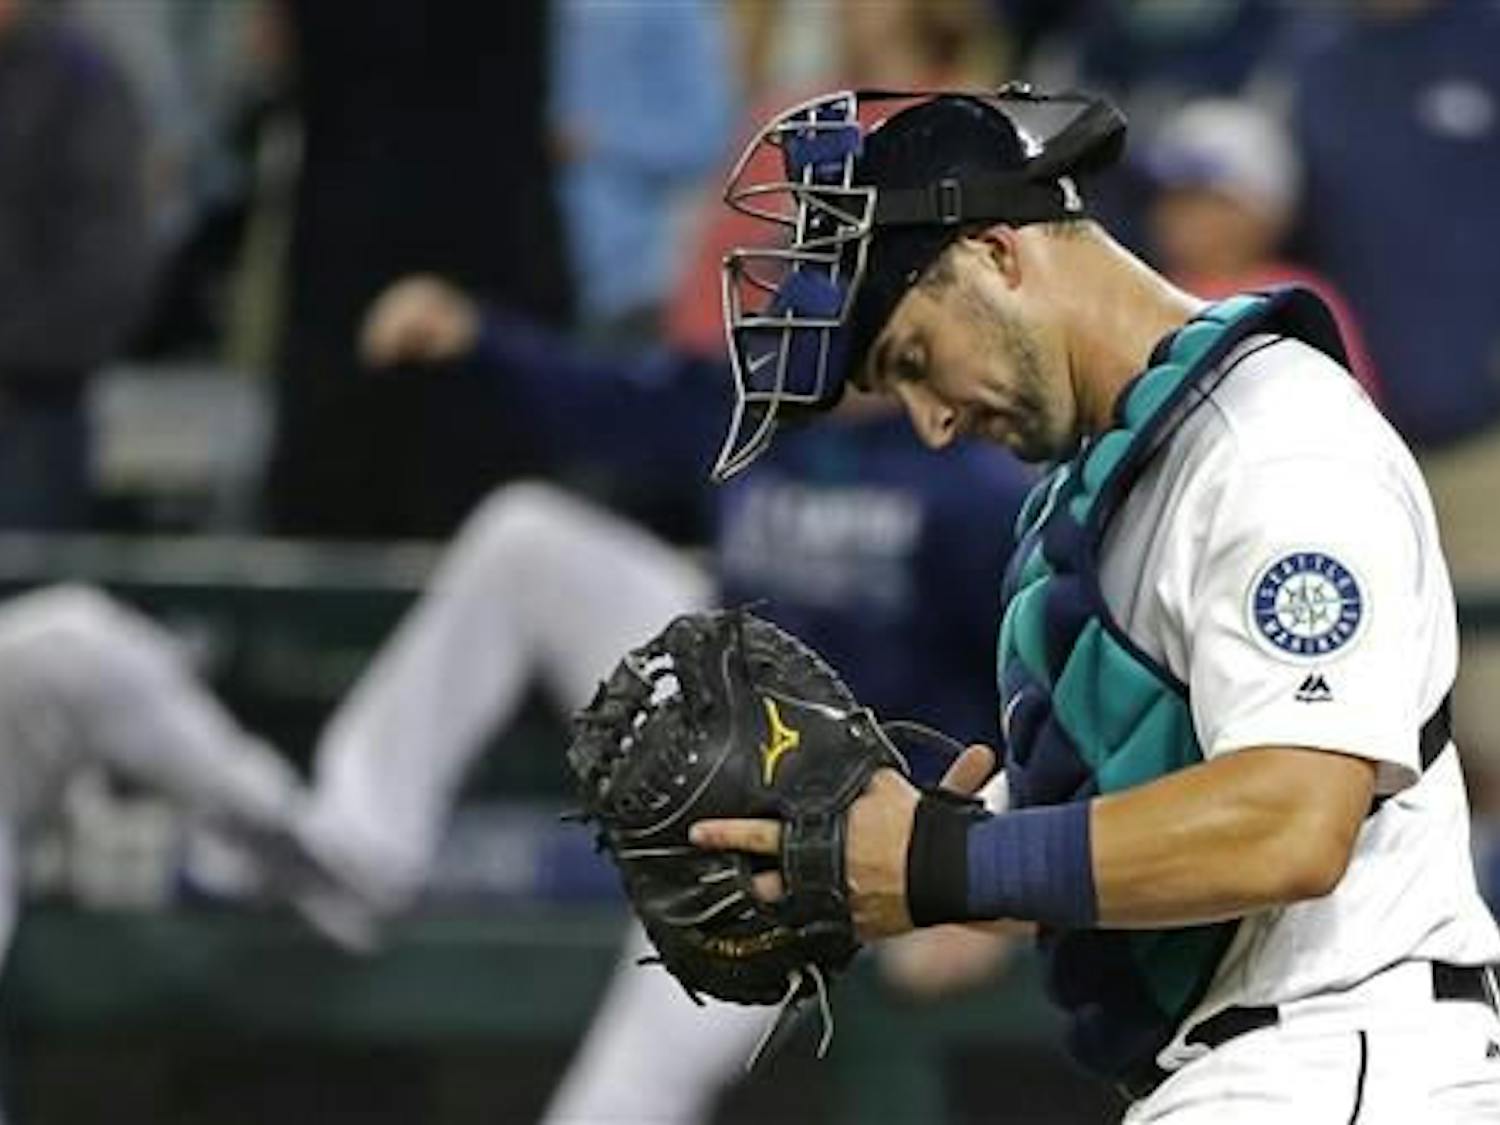 Seattle Mariners catcher Mike&nbsp;Zunino&nbsp;walks to the mound after the the Mariners defeated the Baltimore Orioles 12-6 in a baseball game Saturday, July 2, 2016, in Seattle.